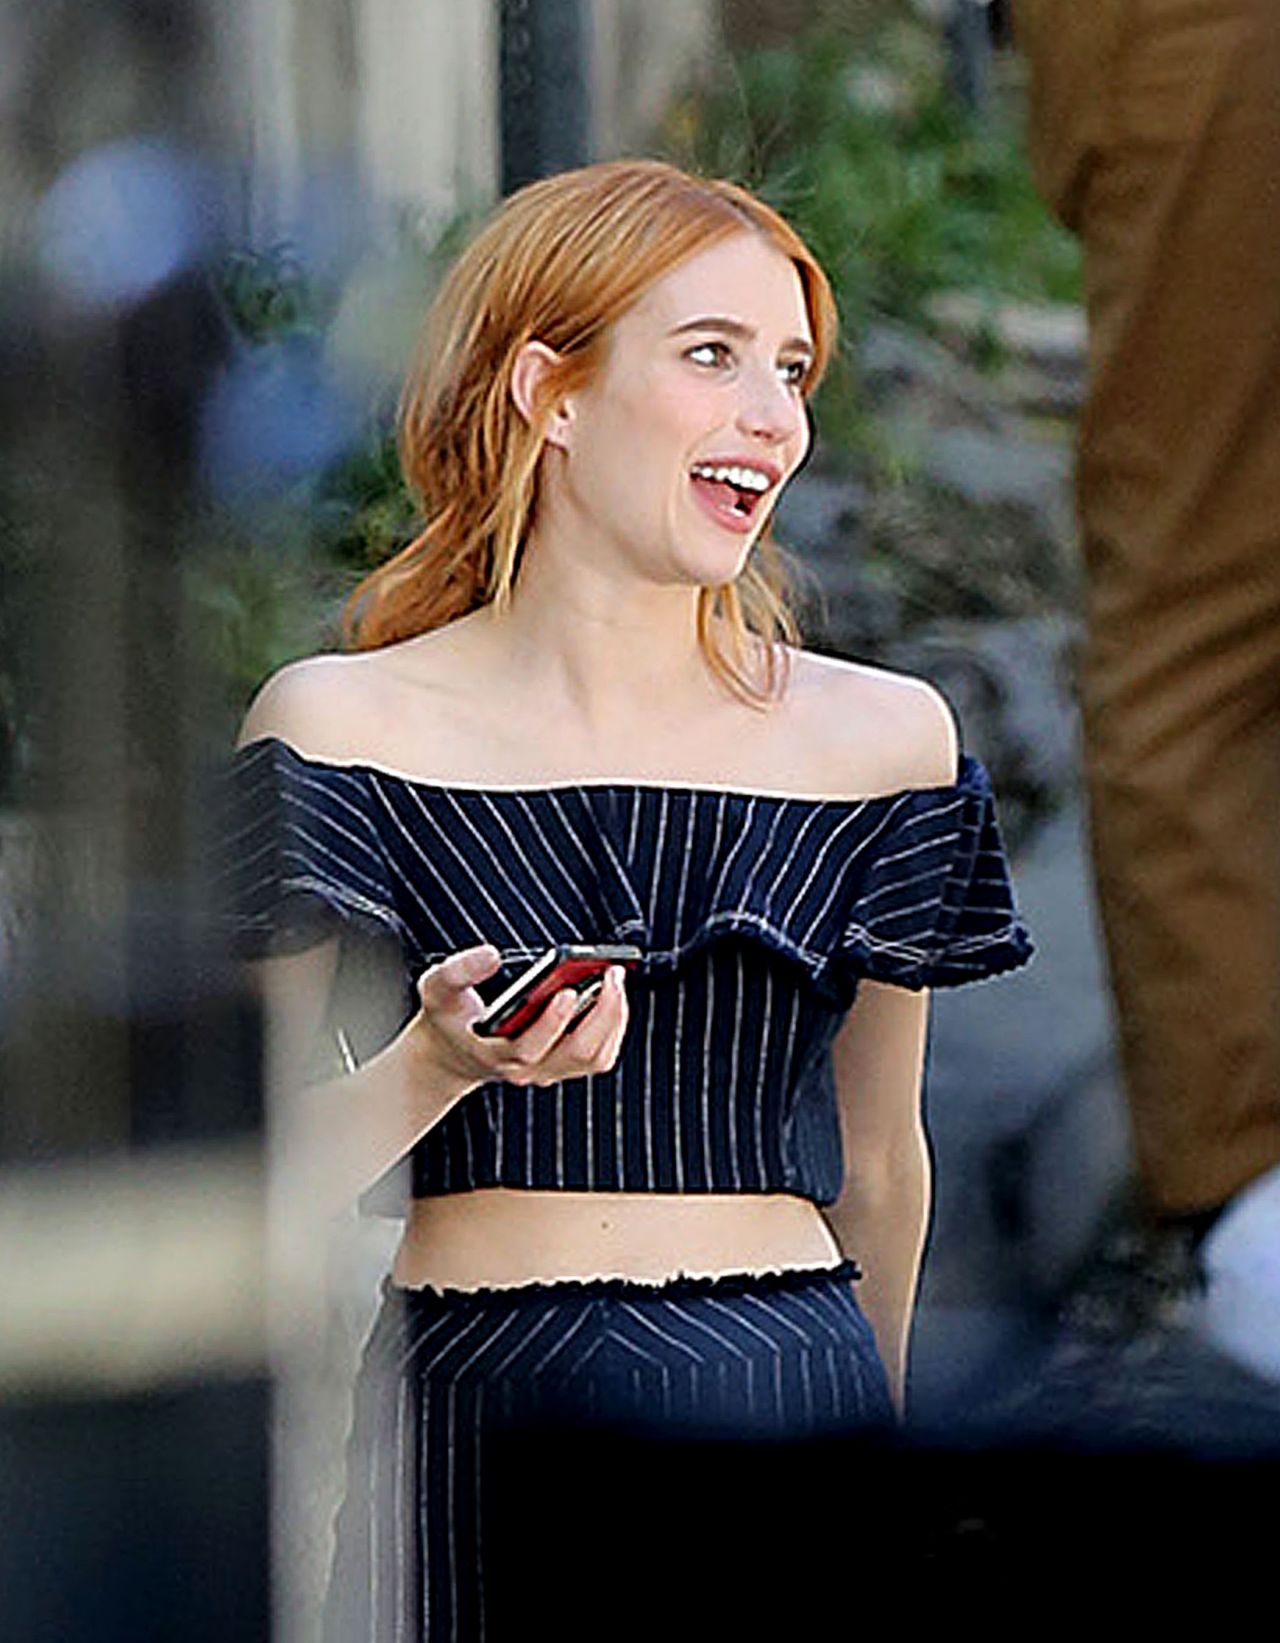 Emma Roberts - Photoshoot in Los Angeles 3/8/ 2017